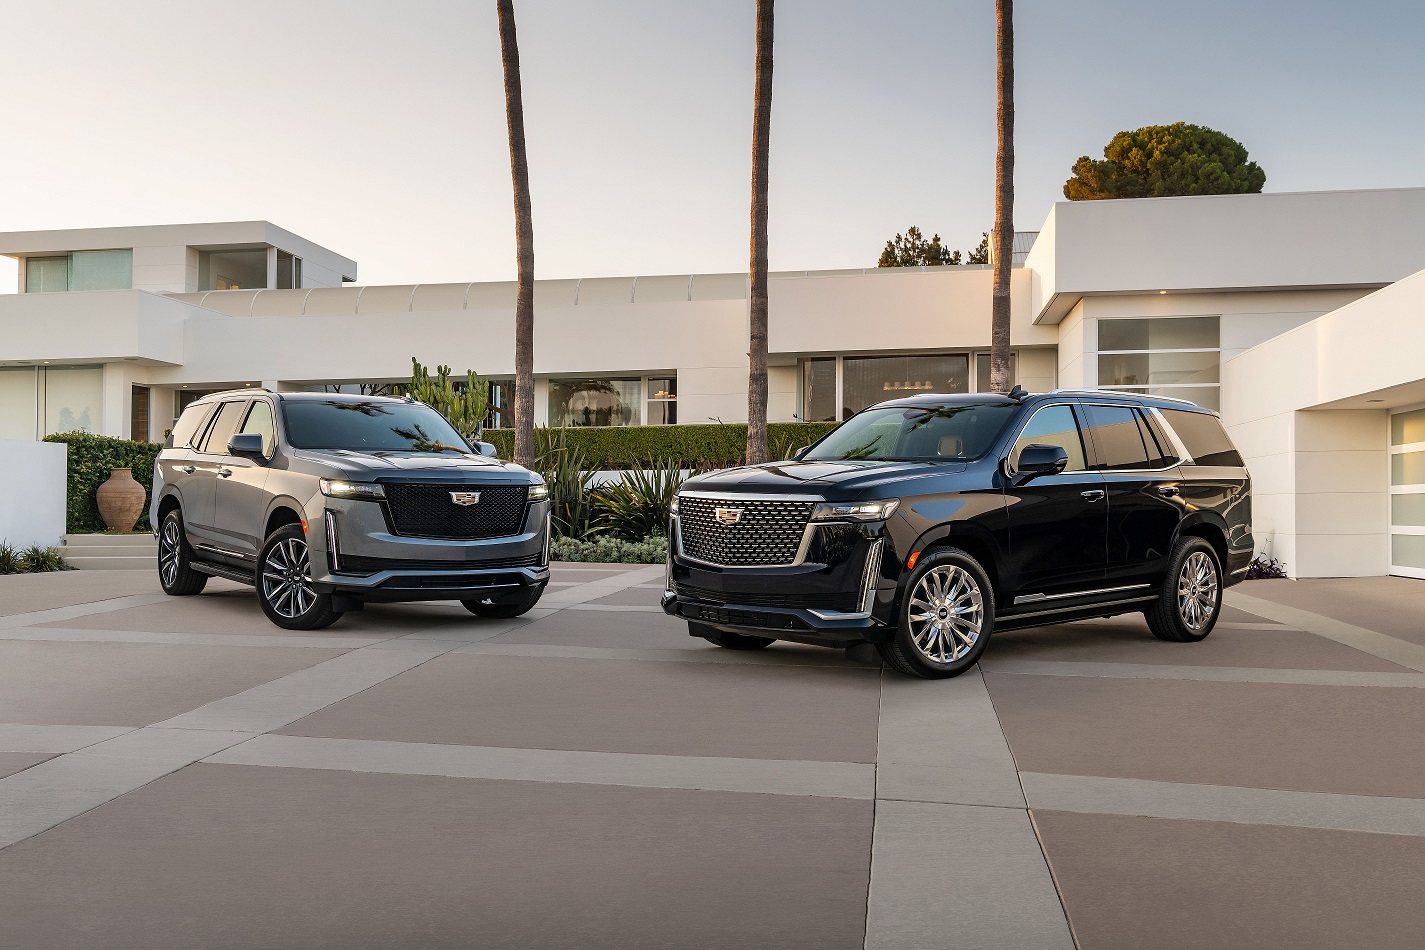 2021 Cadillac Escalade: Cadillac's Ultimate Luxury SUV Is All-New